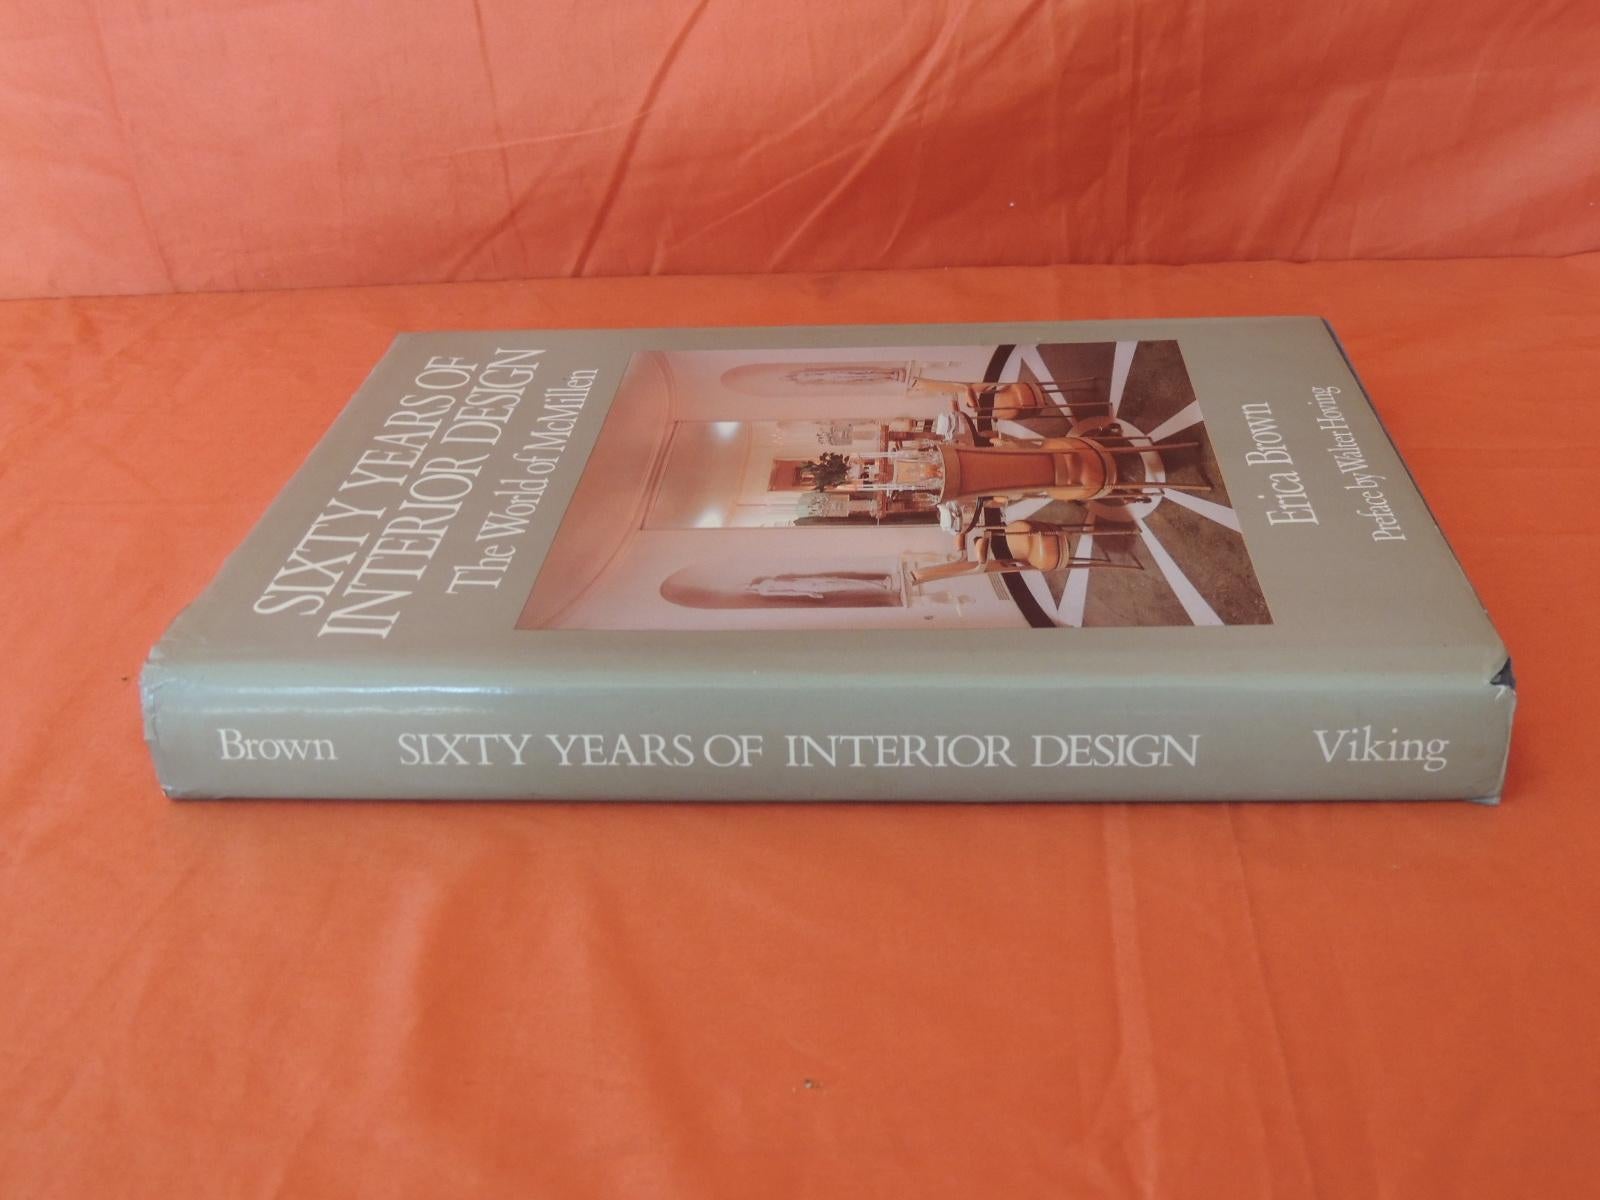 Sixty Years of Interior Design The World of McMillen Vintage Decorative Book
by Erica Brown (Author), Michael Dunne (Photographer), Anthony Denney (Photographer), Tom Leonard (Photographer), Tom Yee (Photographer), Conde Nast (Photographer), Andre